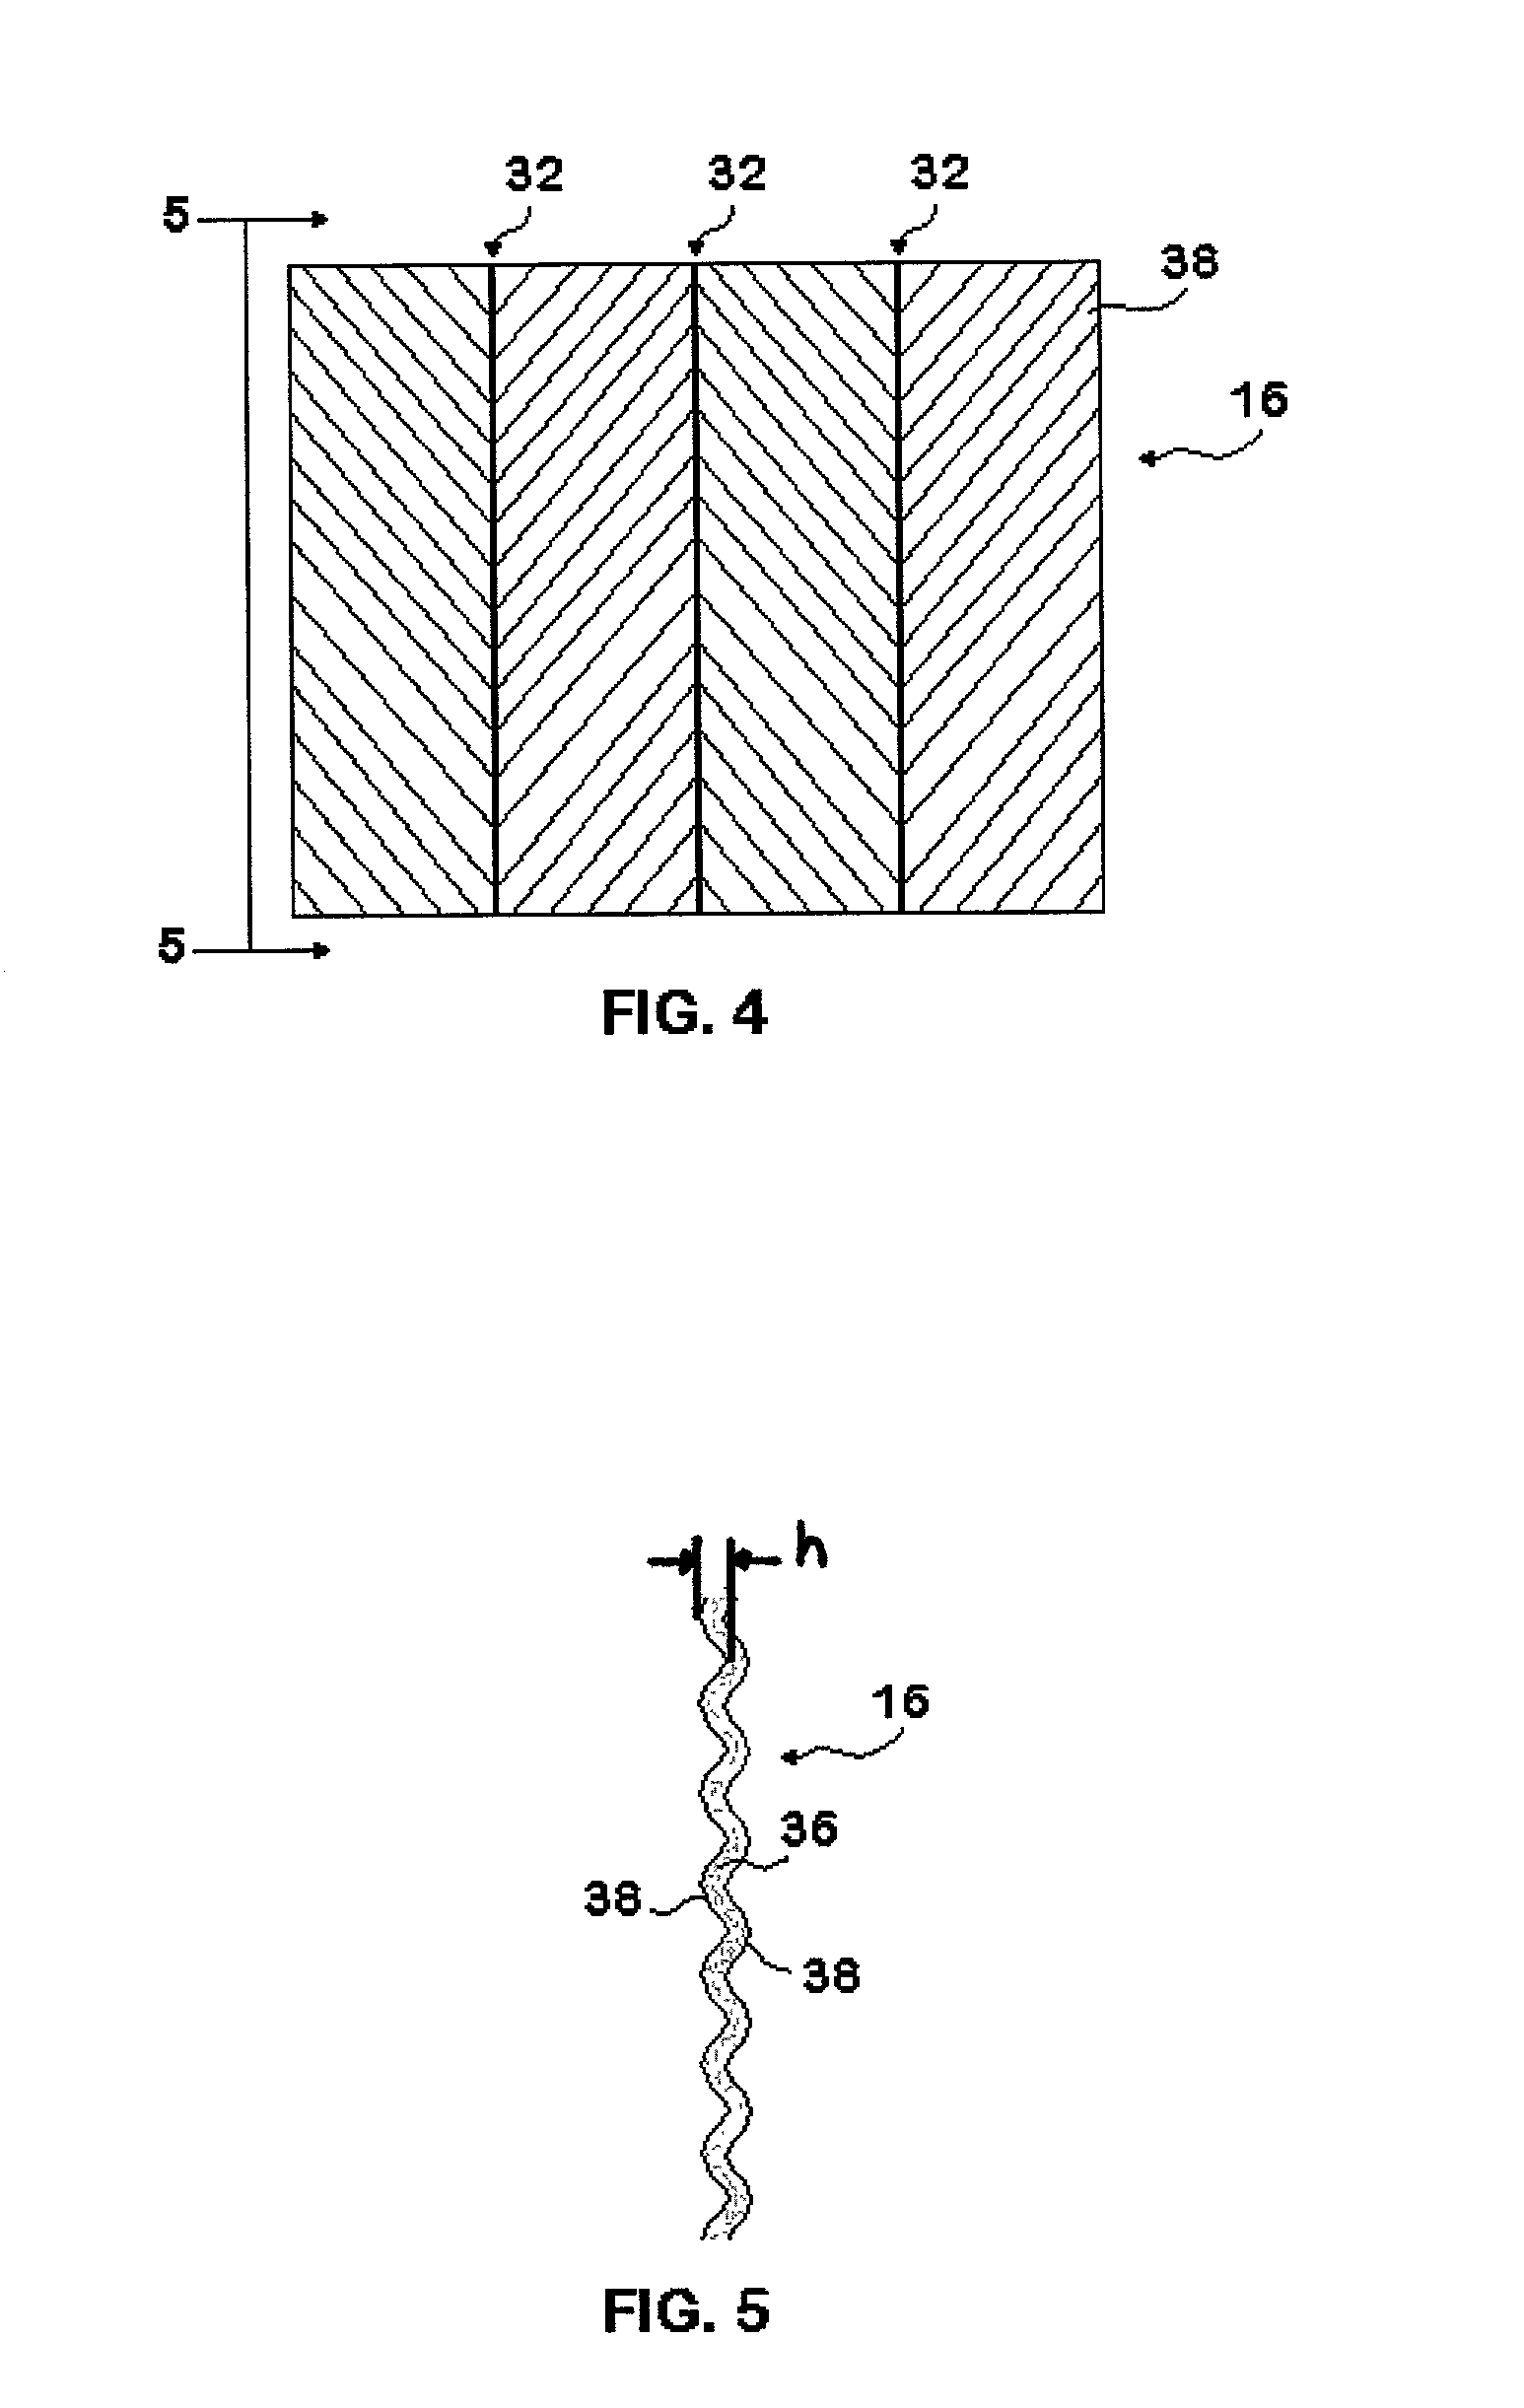 Catalytic monolith support system with improved thermal resistance and mechanical properties